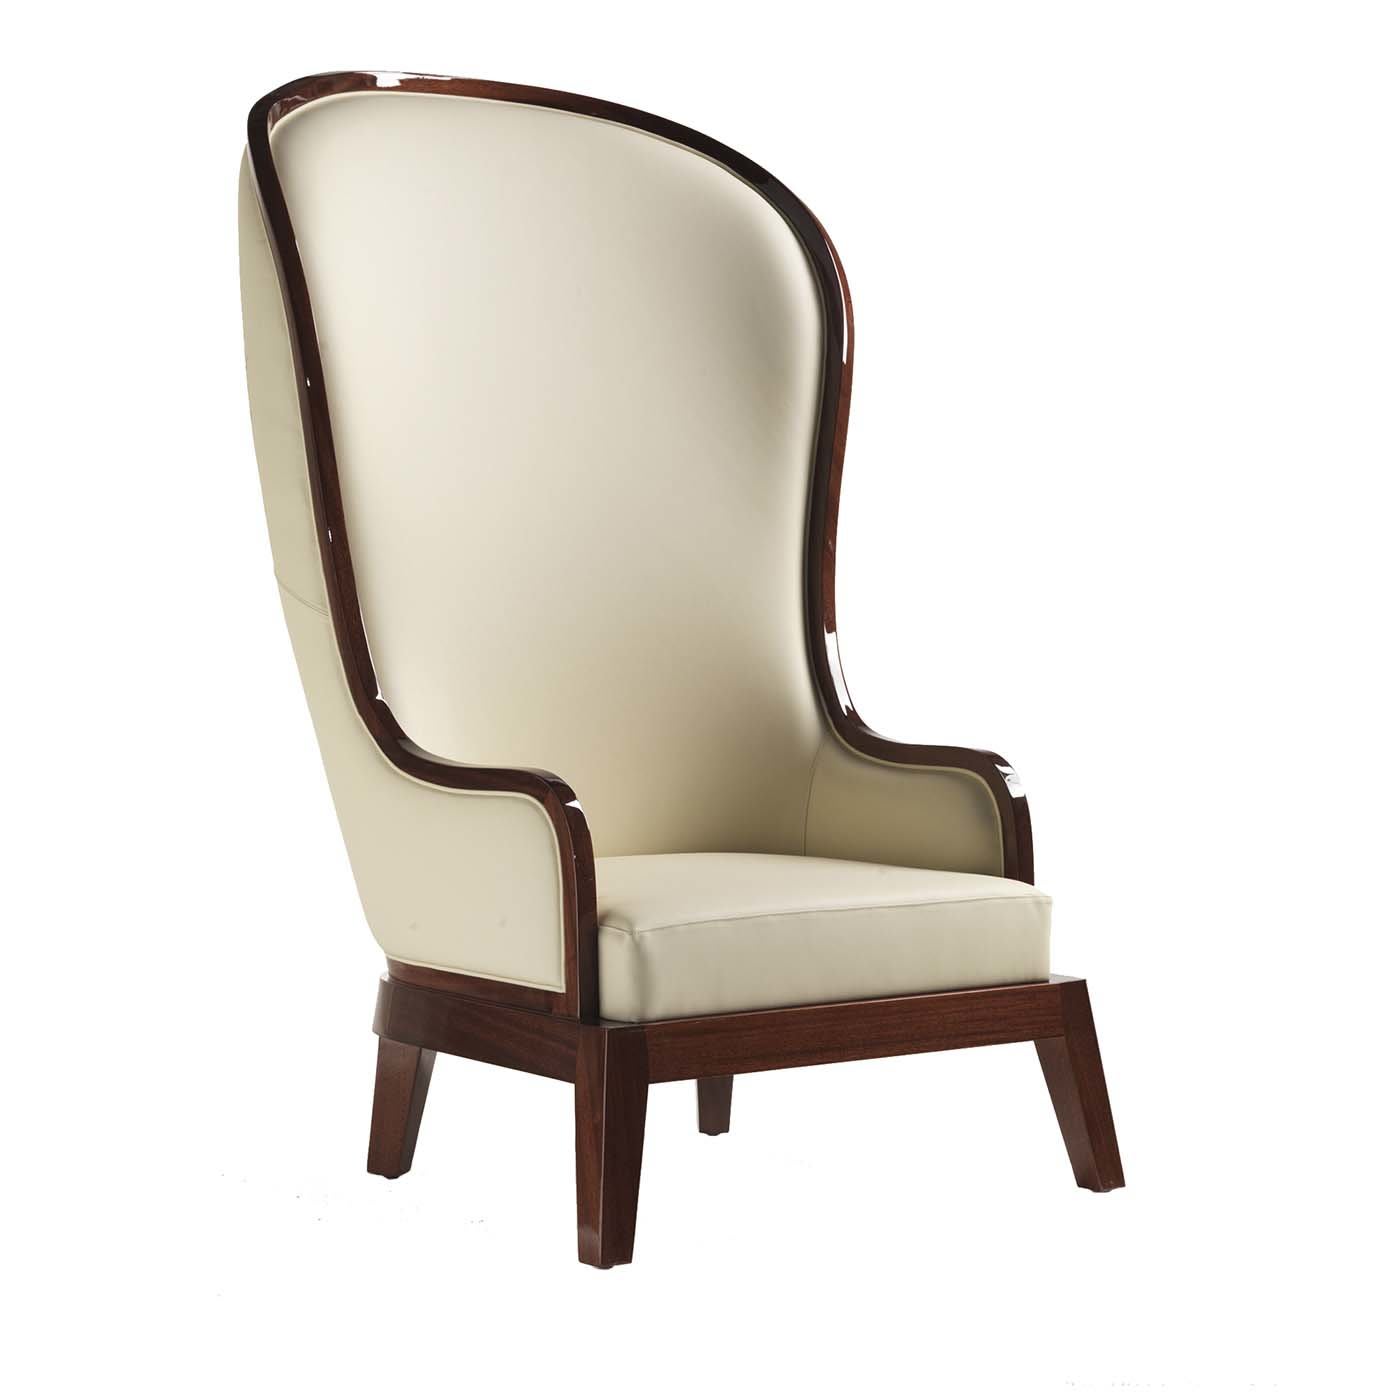 Duchesse of Home White Armchair by Archer Humphryes Architects - Fratelli Boffi